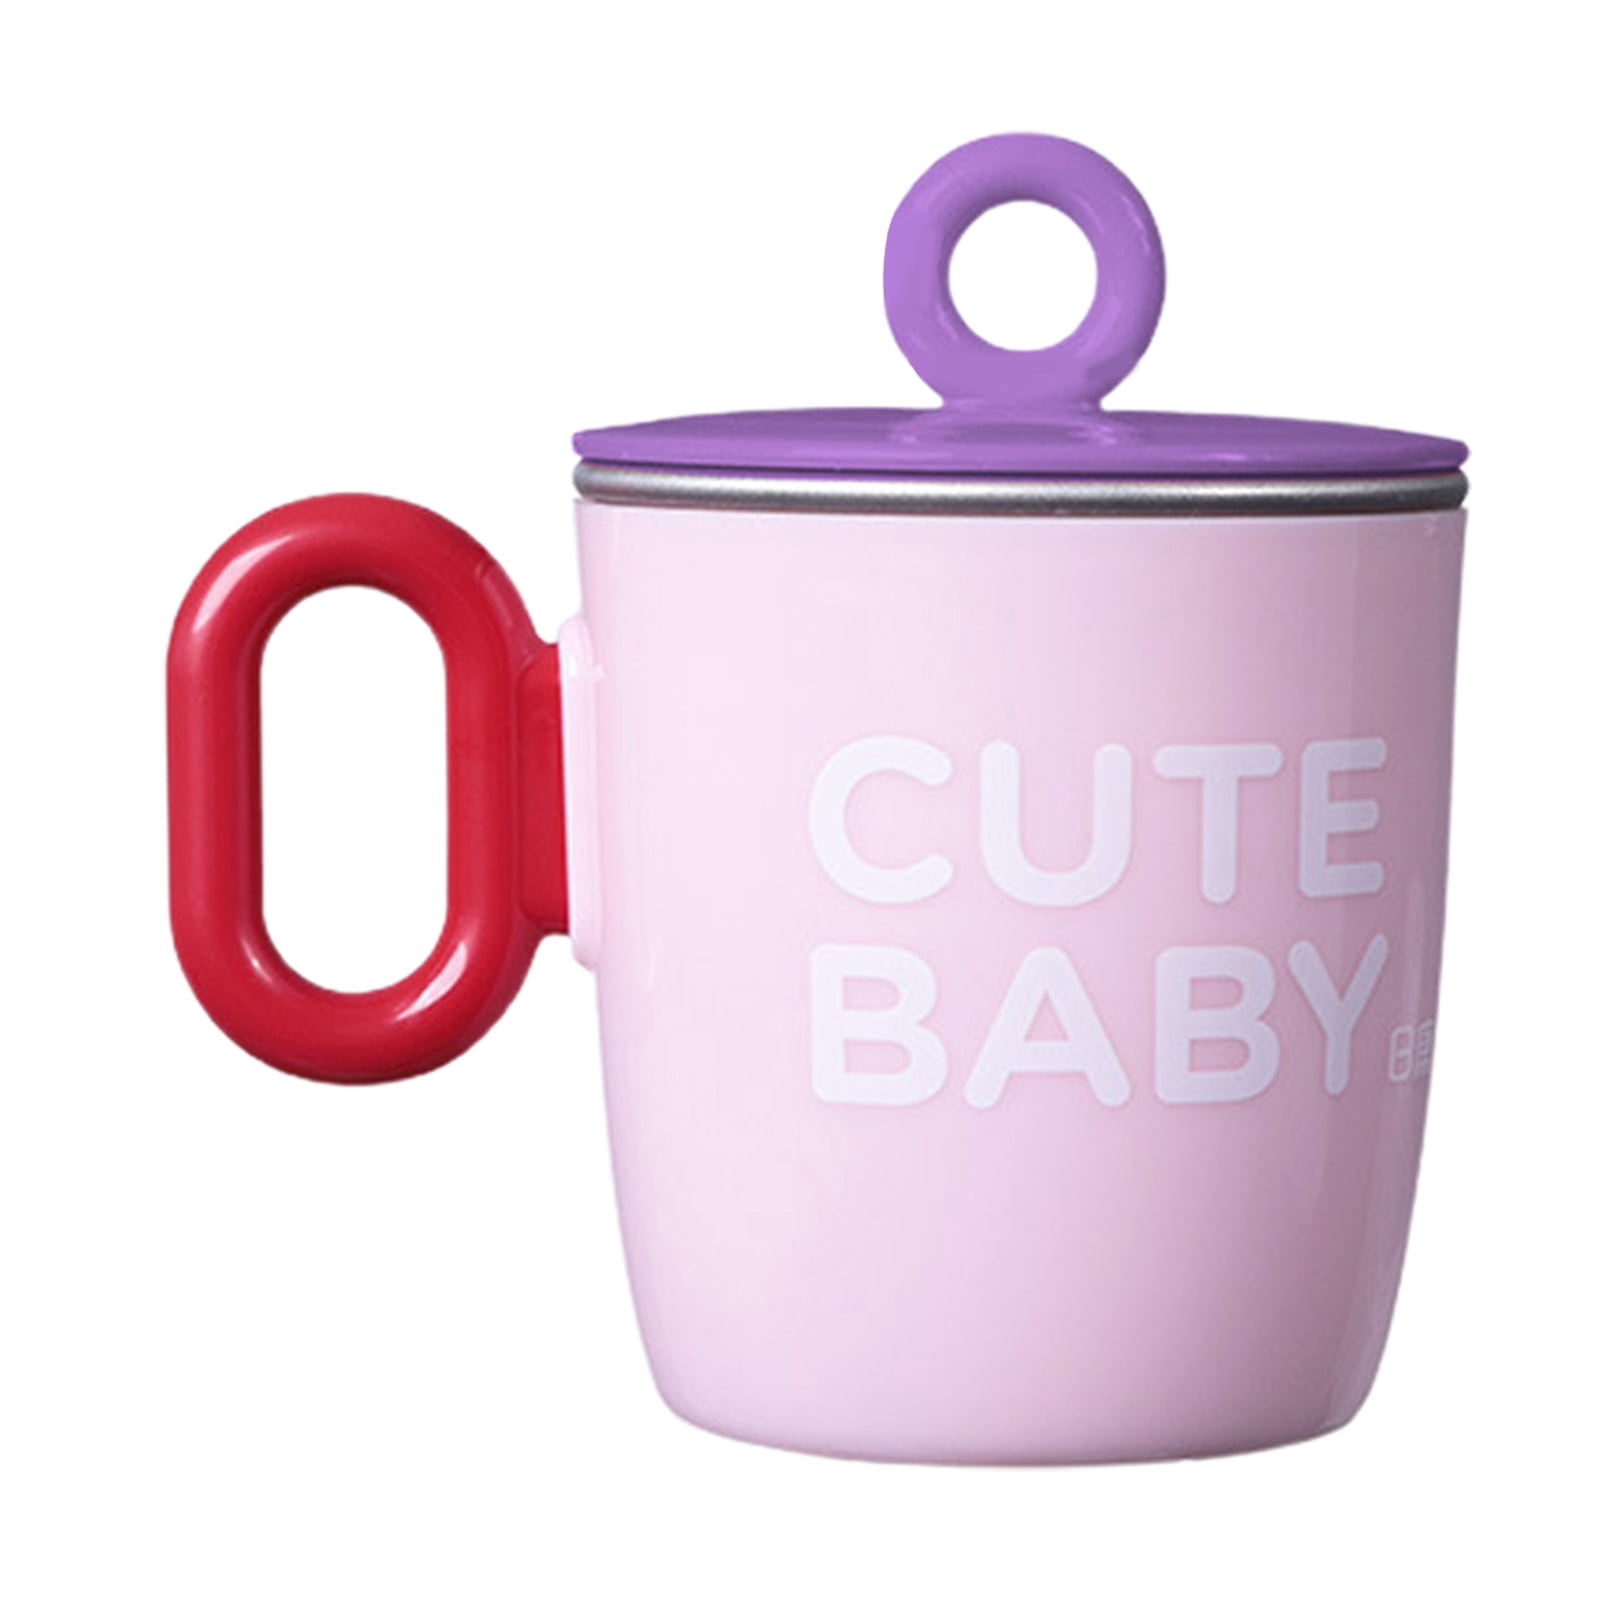 Travelwant 250ml Baby Kids Toddler Sippy Cup Mug for Milk, Coffee